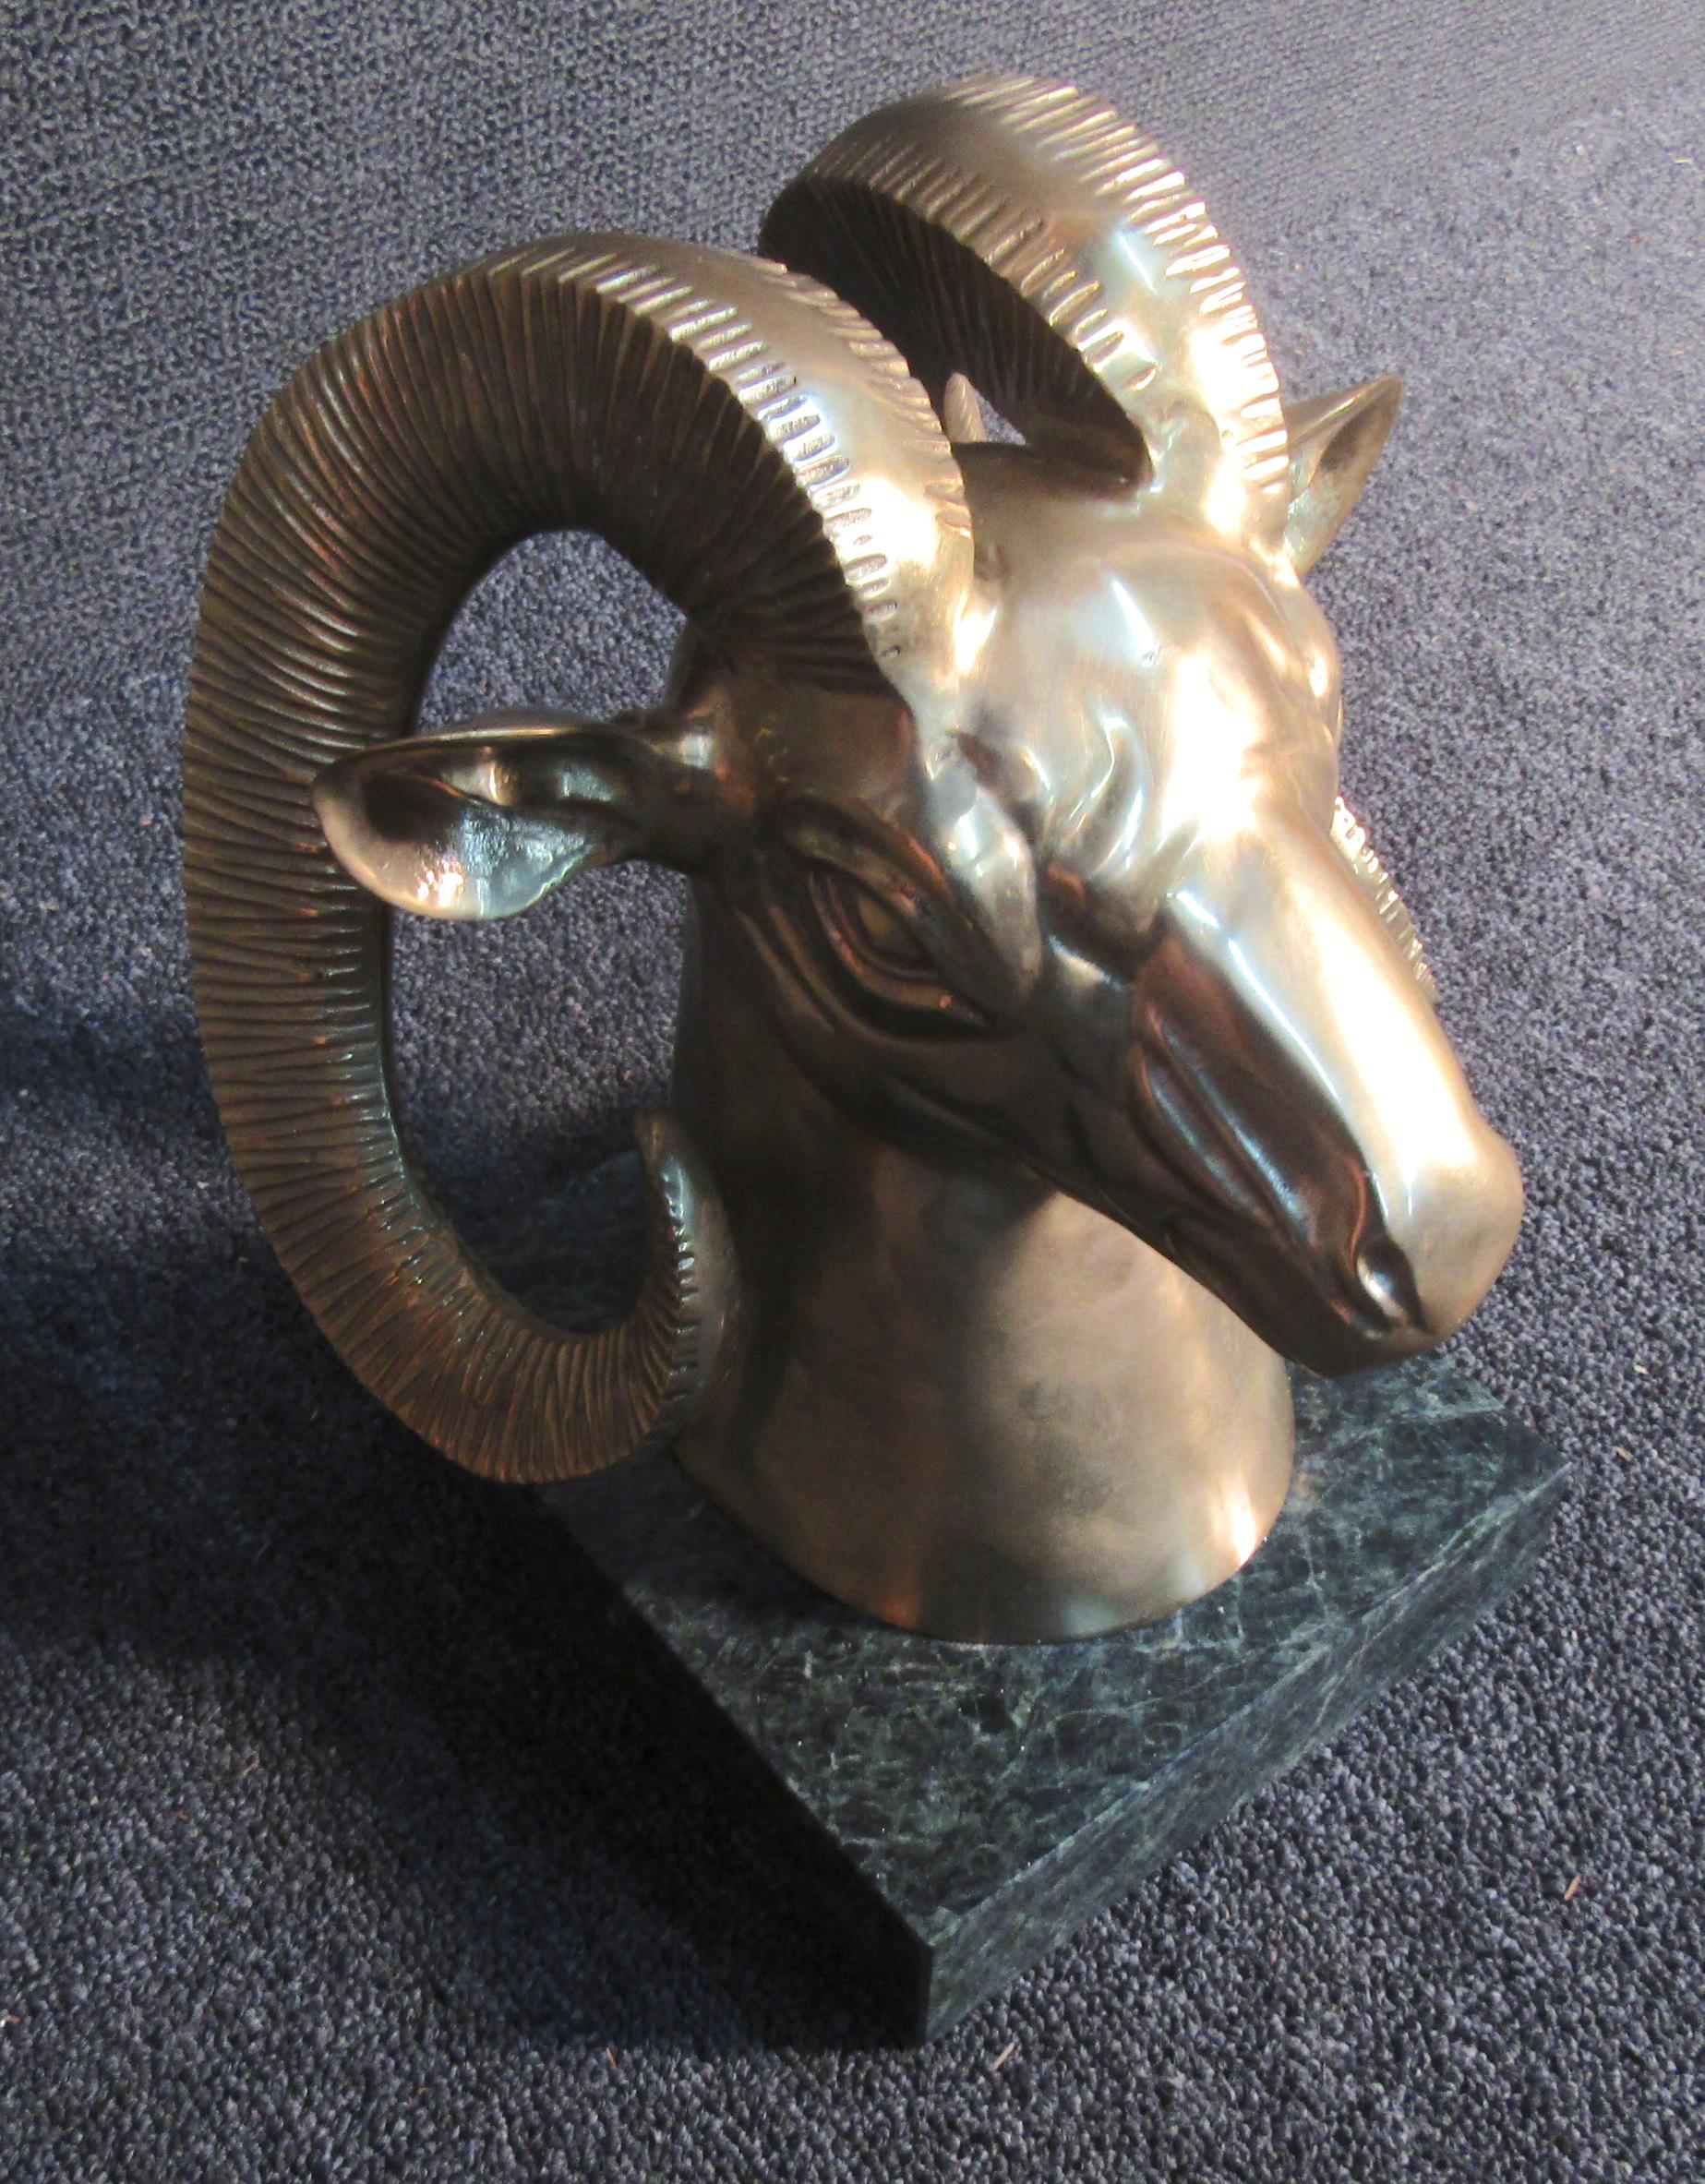 Stunning golden brass colored goats head sculpture mounted on a beautiful green marble base. This stunningly detailed sculpture would make a beautiful addition to any mantle or console table and is sure to draw lots of attention.

Please confirm